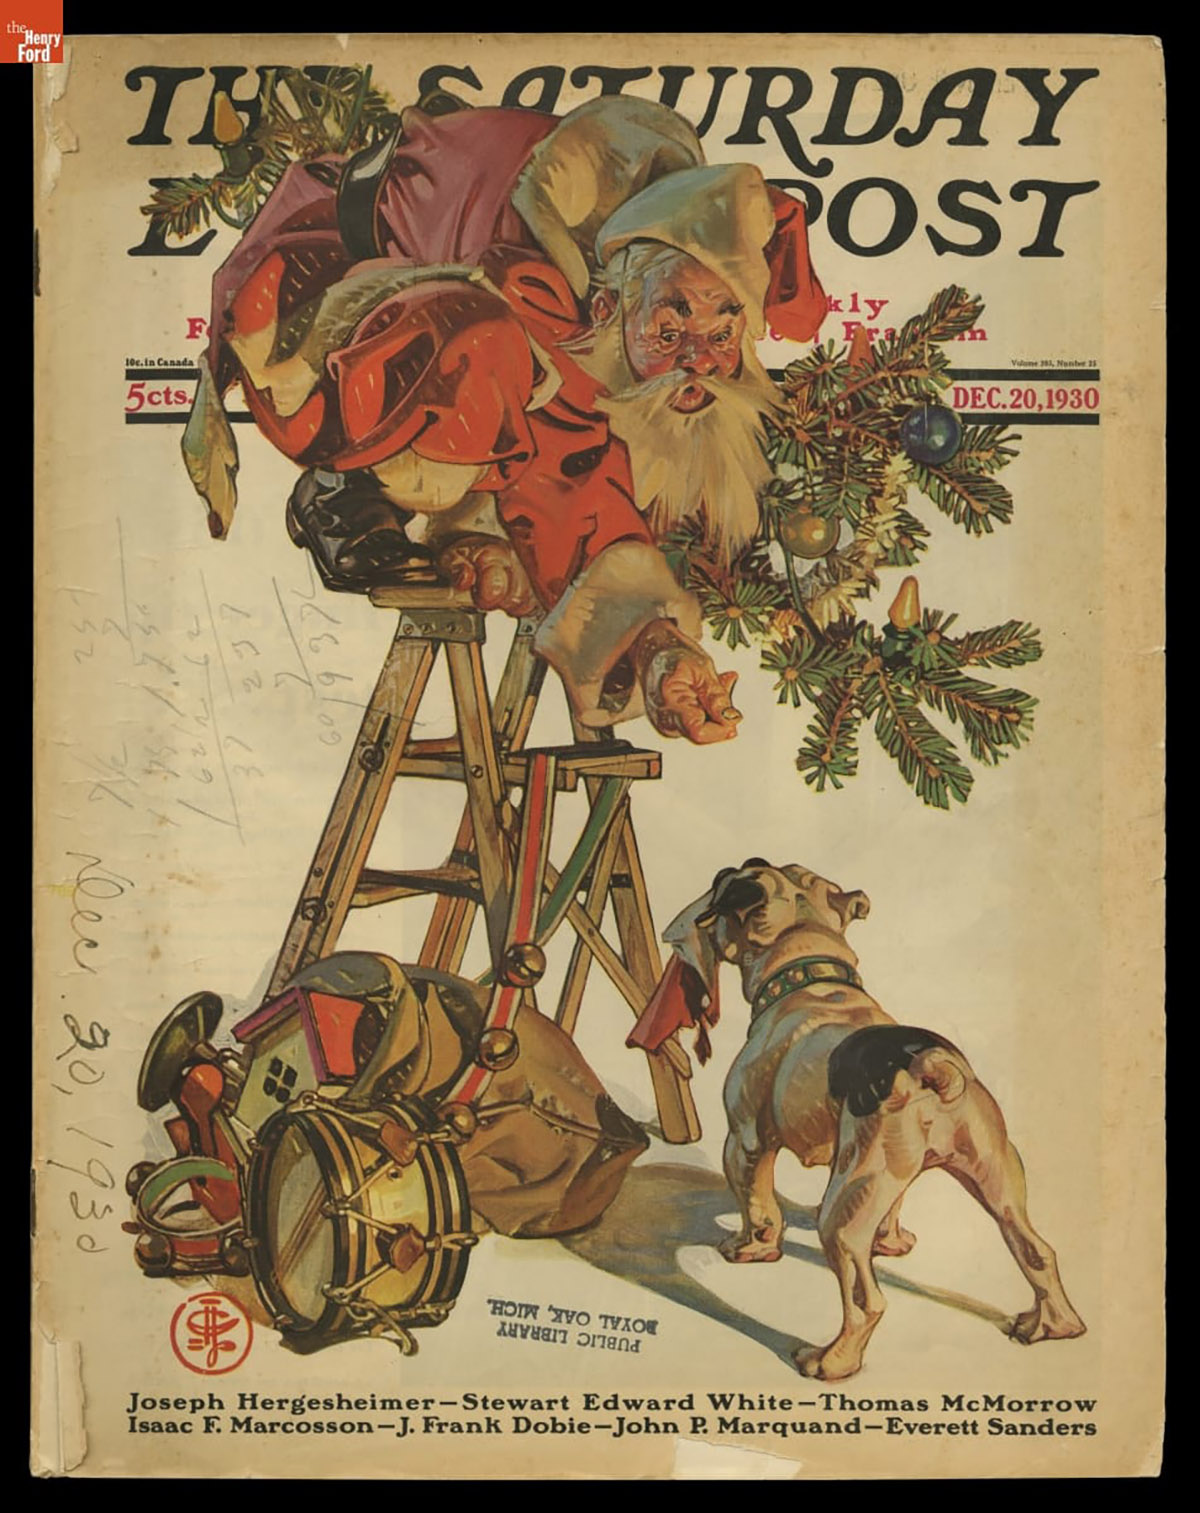 Leyendecker’s now-iconic depiction of Santa Claus featured on the December 20, 1930, cover of The Saturday Evening Post.